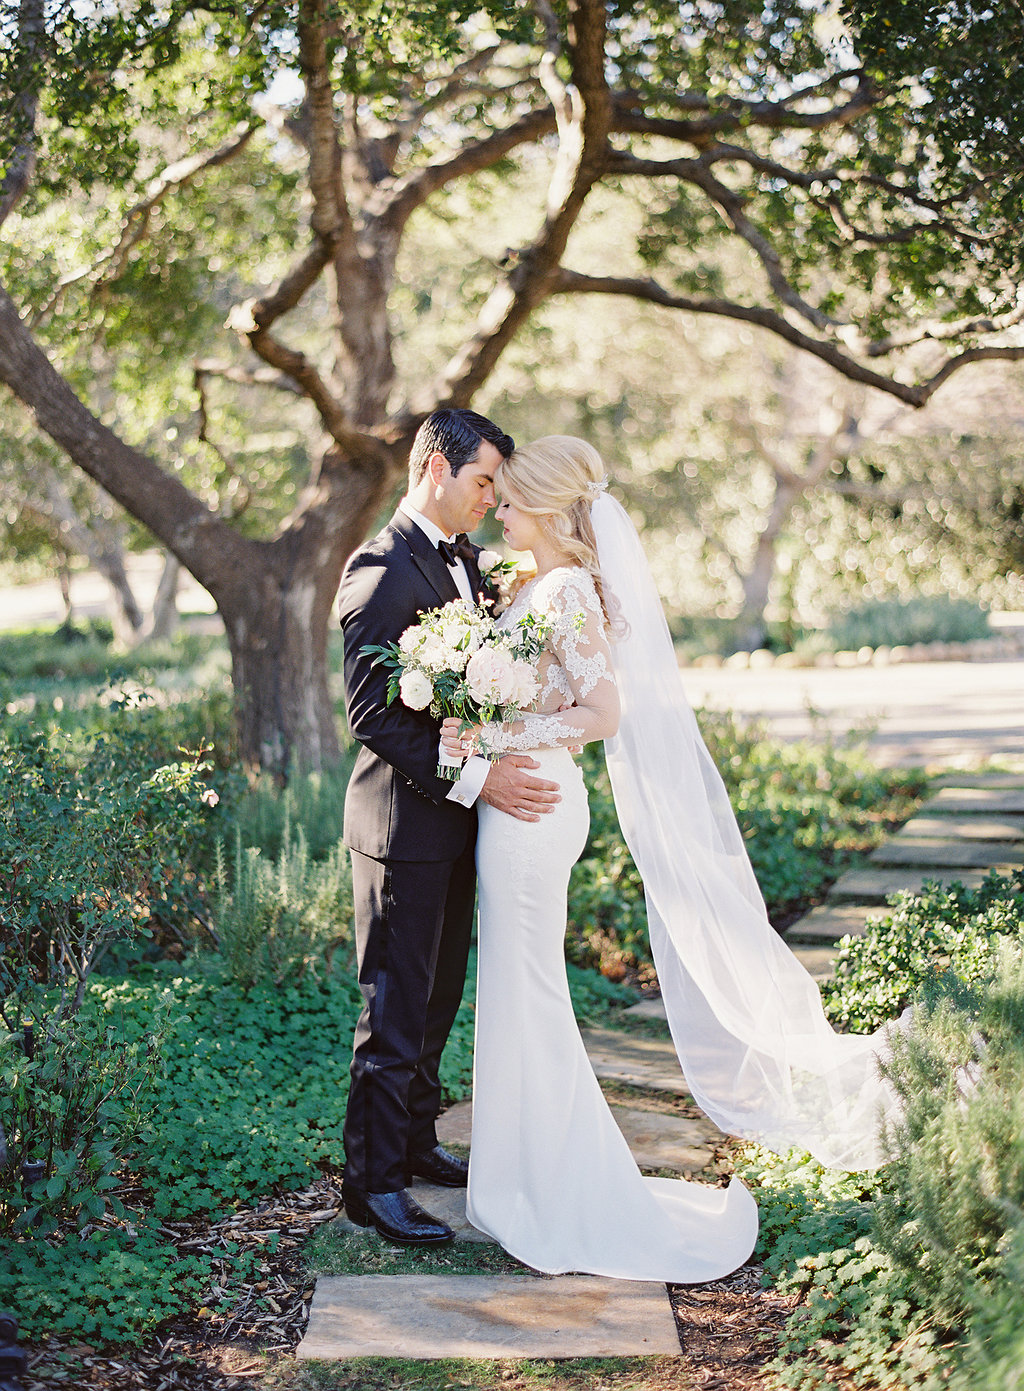 Bouquet by Cody Floral Design | Santa Barbara Wedding Florist | Photography by The Great Romance